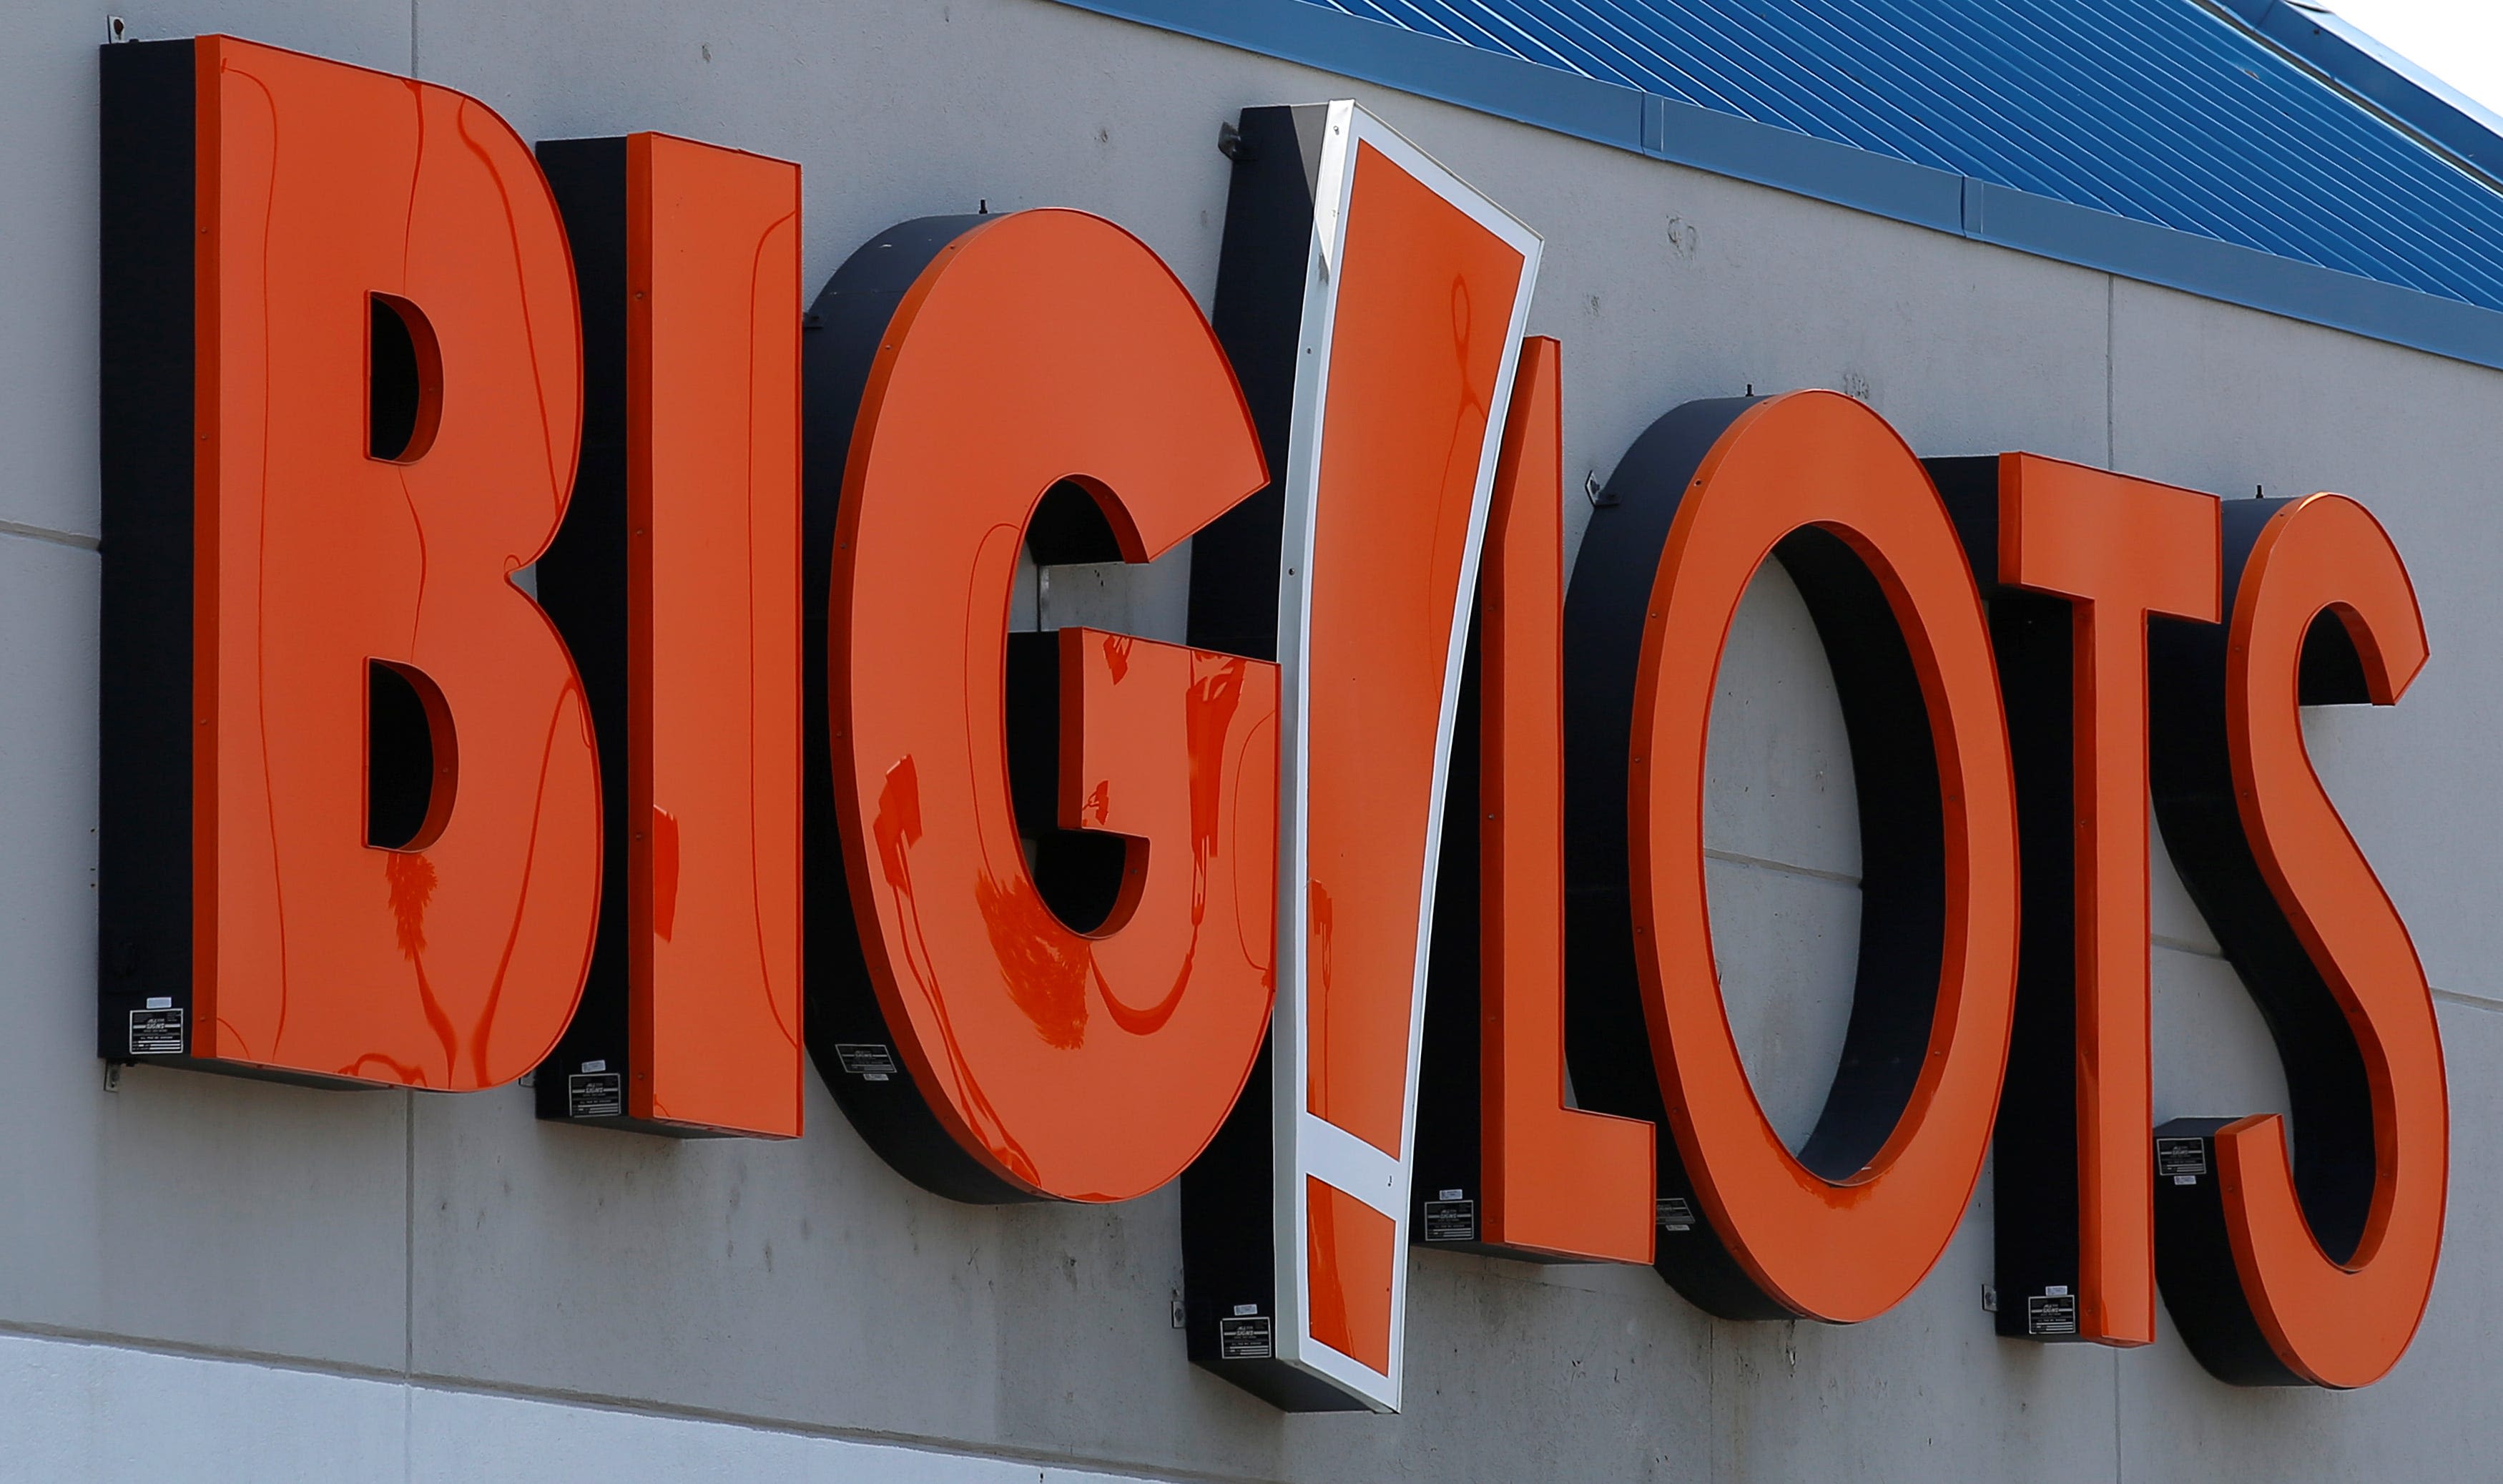 Big Lots is closing 35-40 stores: Here's how many North Carolina stores are on the list